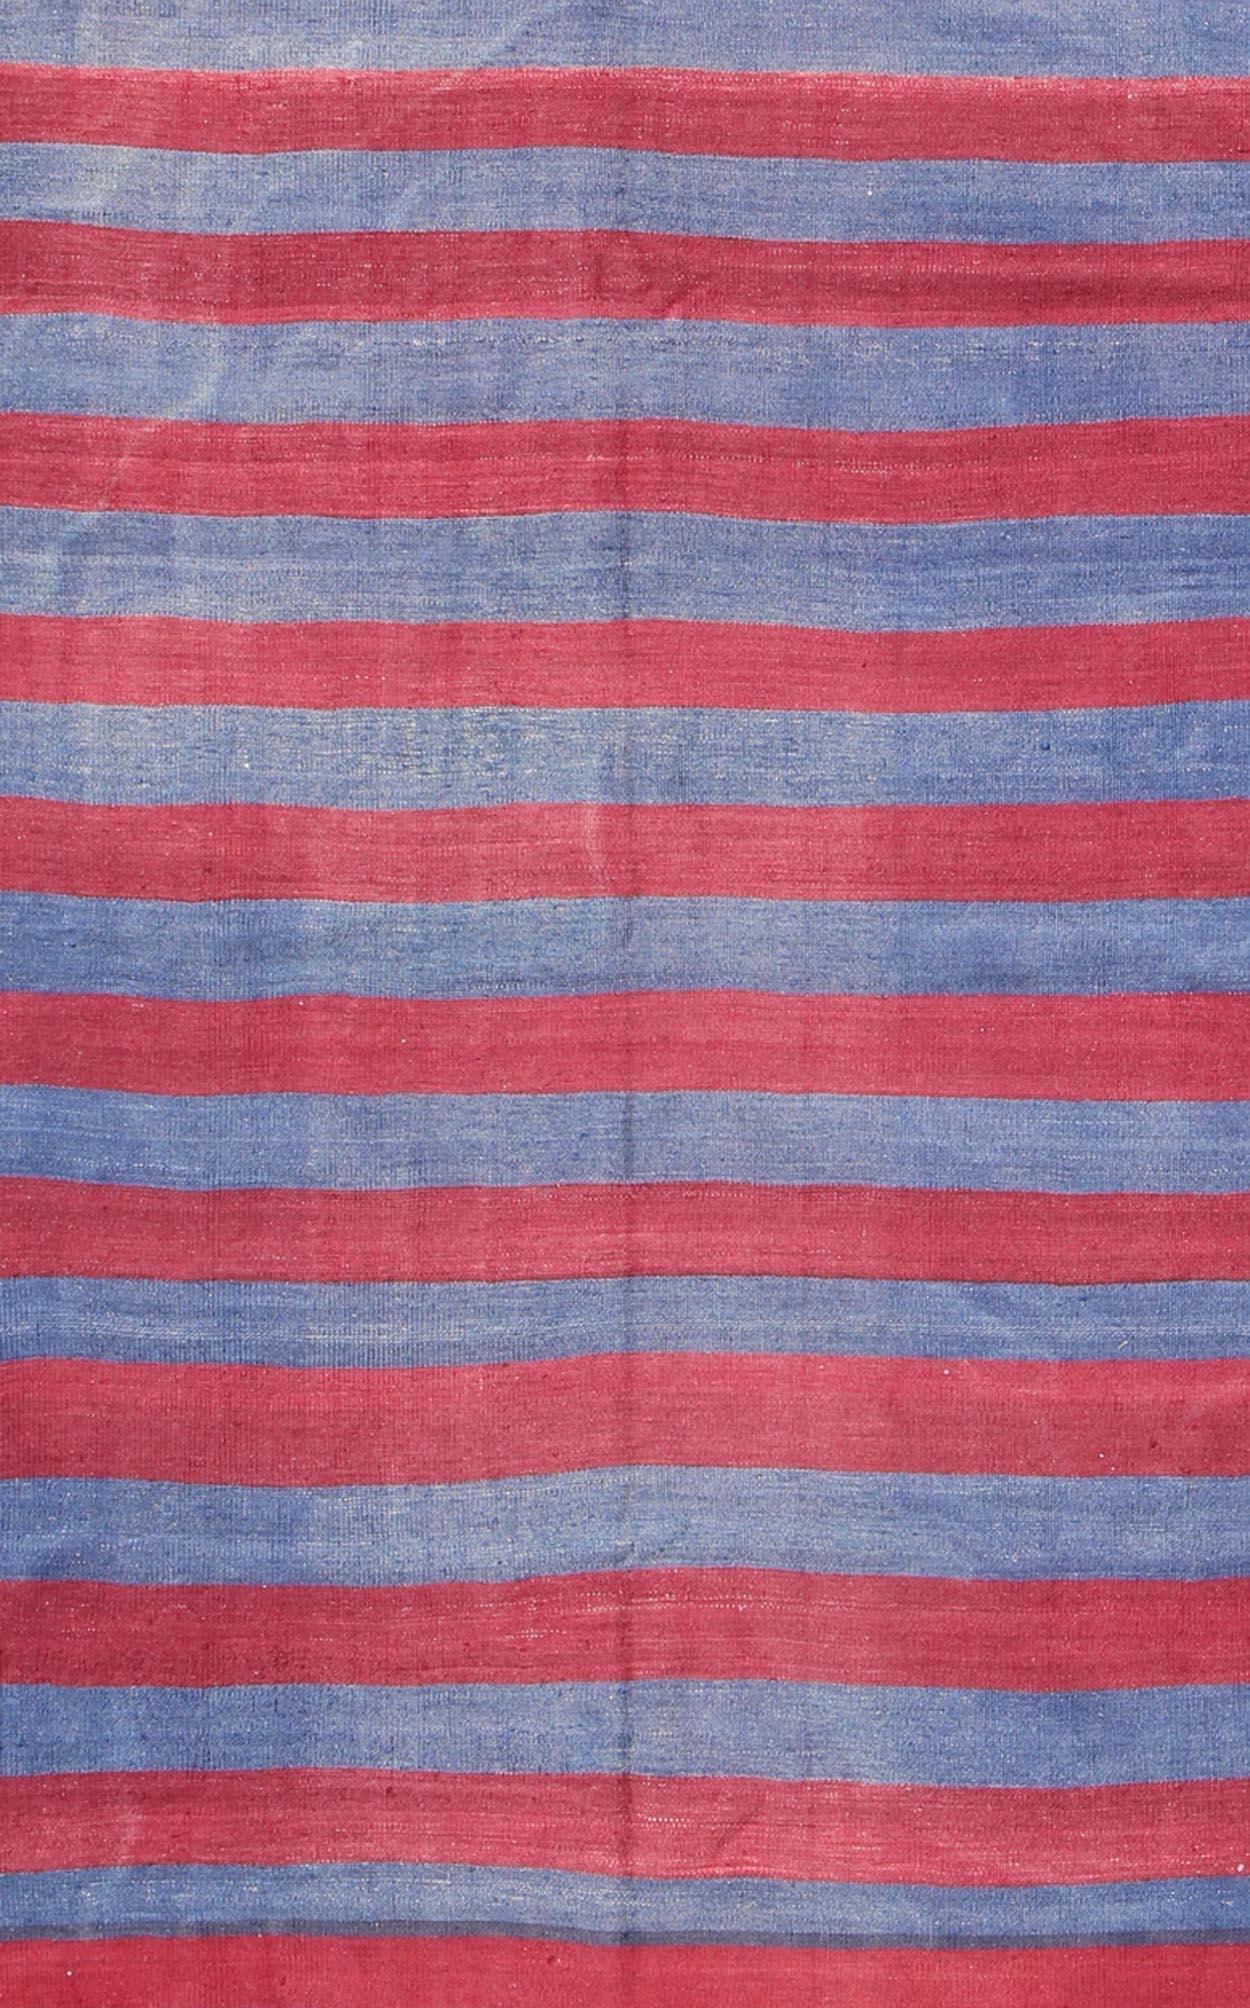 Vintage Striped Turkish Kilim with Casual Modern Design in Red and Blue In Good Condition For Sale In Atlanta, GA